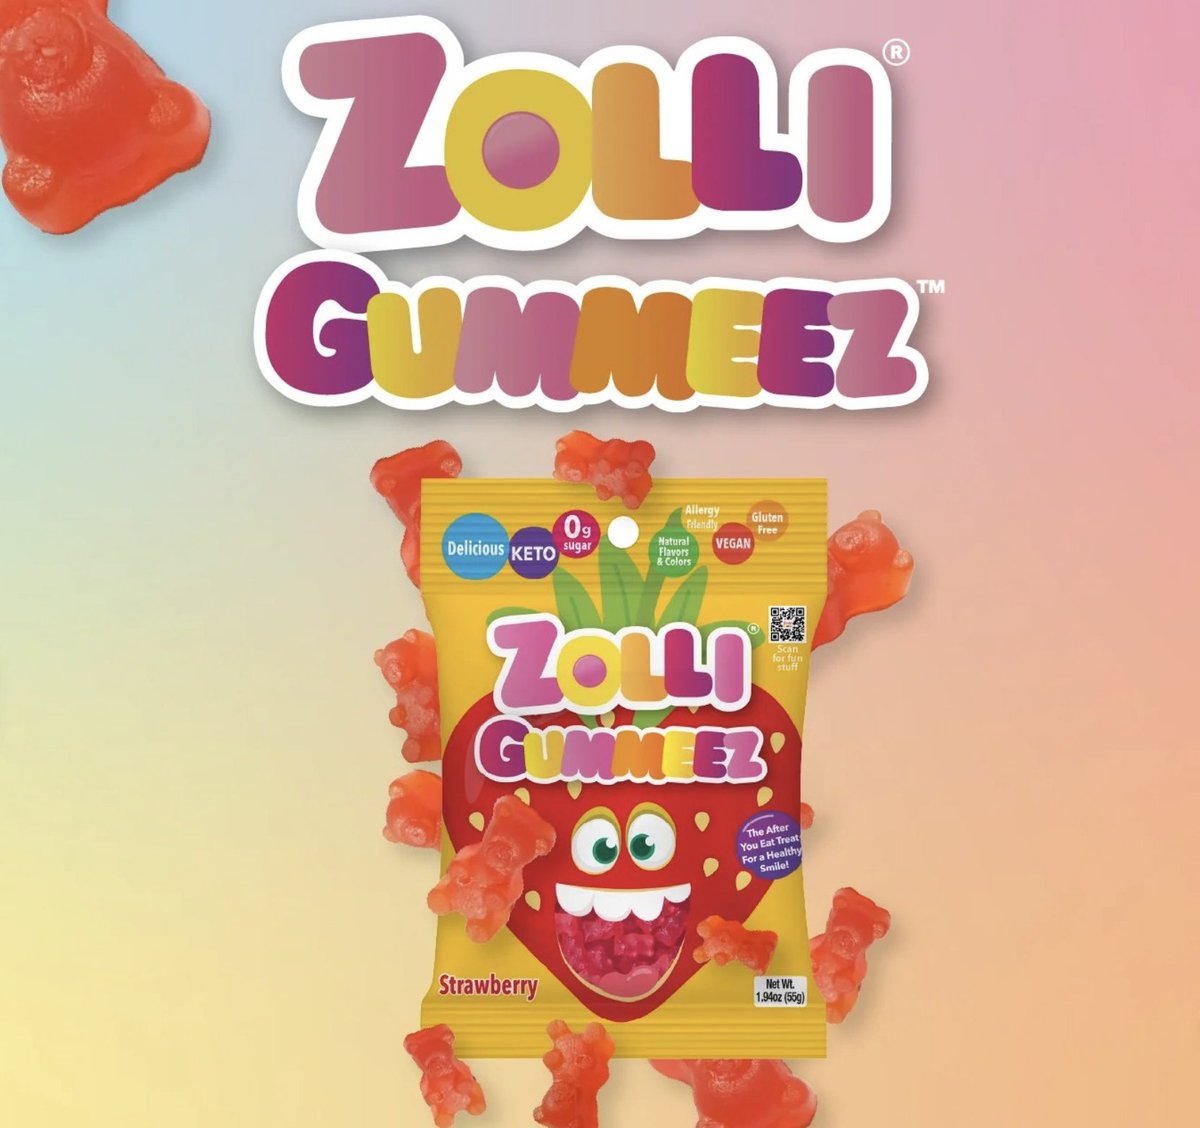 FREE Healthy Snack Boxes! bit.ly/3RSiEcA 🎉

Everyone’s favorite sugar free candy @Zollipops are back with their newest and yummiest creation Zolli Gummeez Strawberry! 🍓😍

Can't wait? Use this coupon code for 15% Off: Goodie15 bit.ly/3IA3oxN